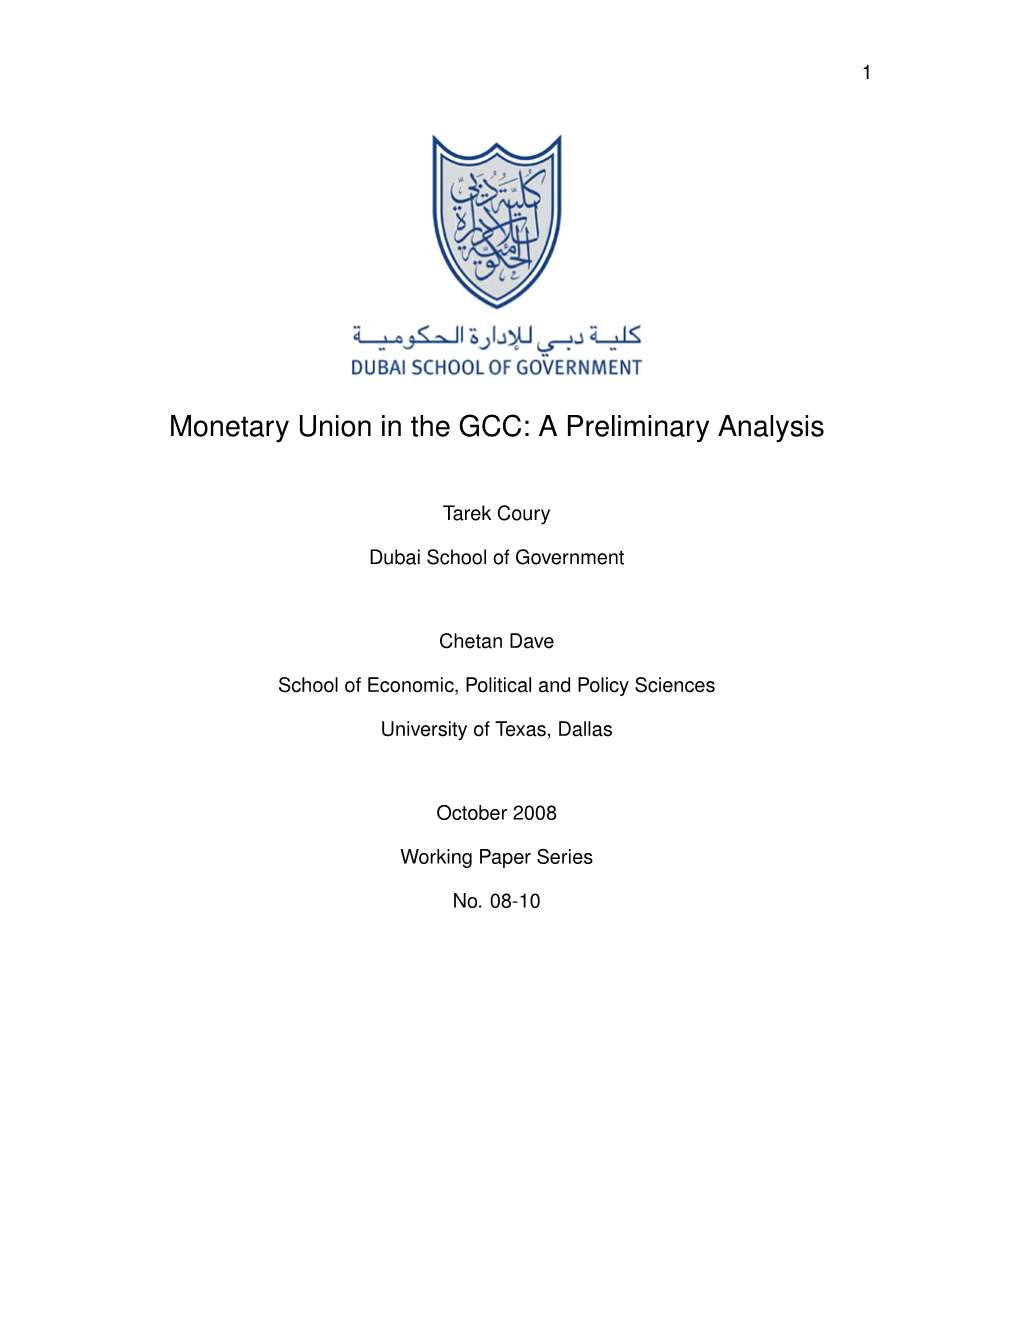 Monetary Union in the GCC: a Preliminary Analysis